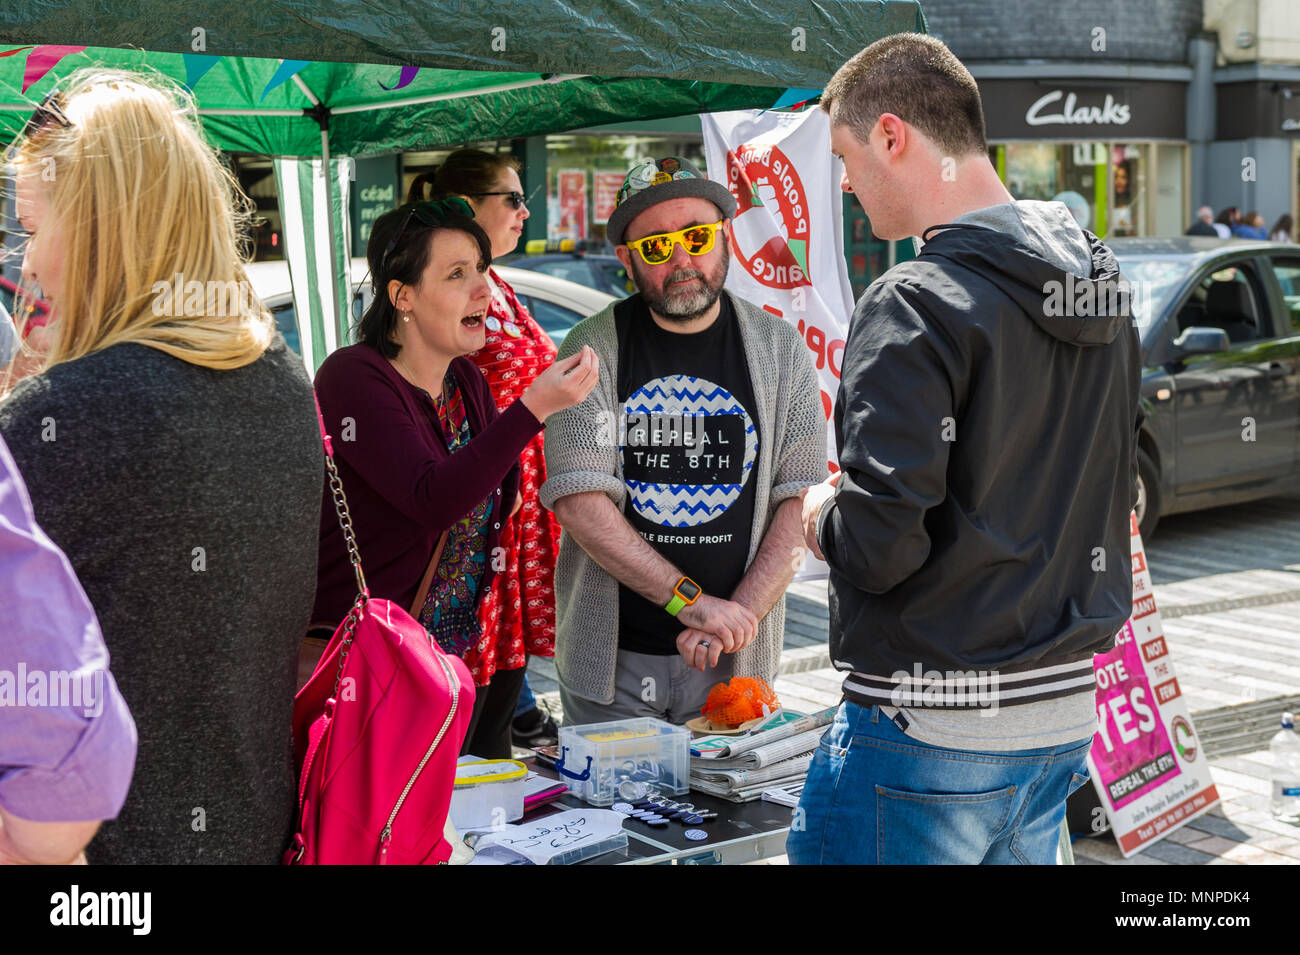 Cork, Ireland. 19th May, 2018. With just under a week to go before the Abortion Referendum in Ireland, Political Party 'People Before Profit' ran an information stall in Cork city today, urging people to vote 'Yes'. Credit: AG News/Alamy Live News. Stock Photo